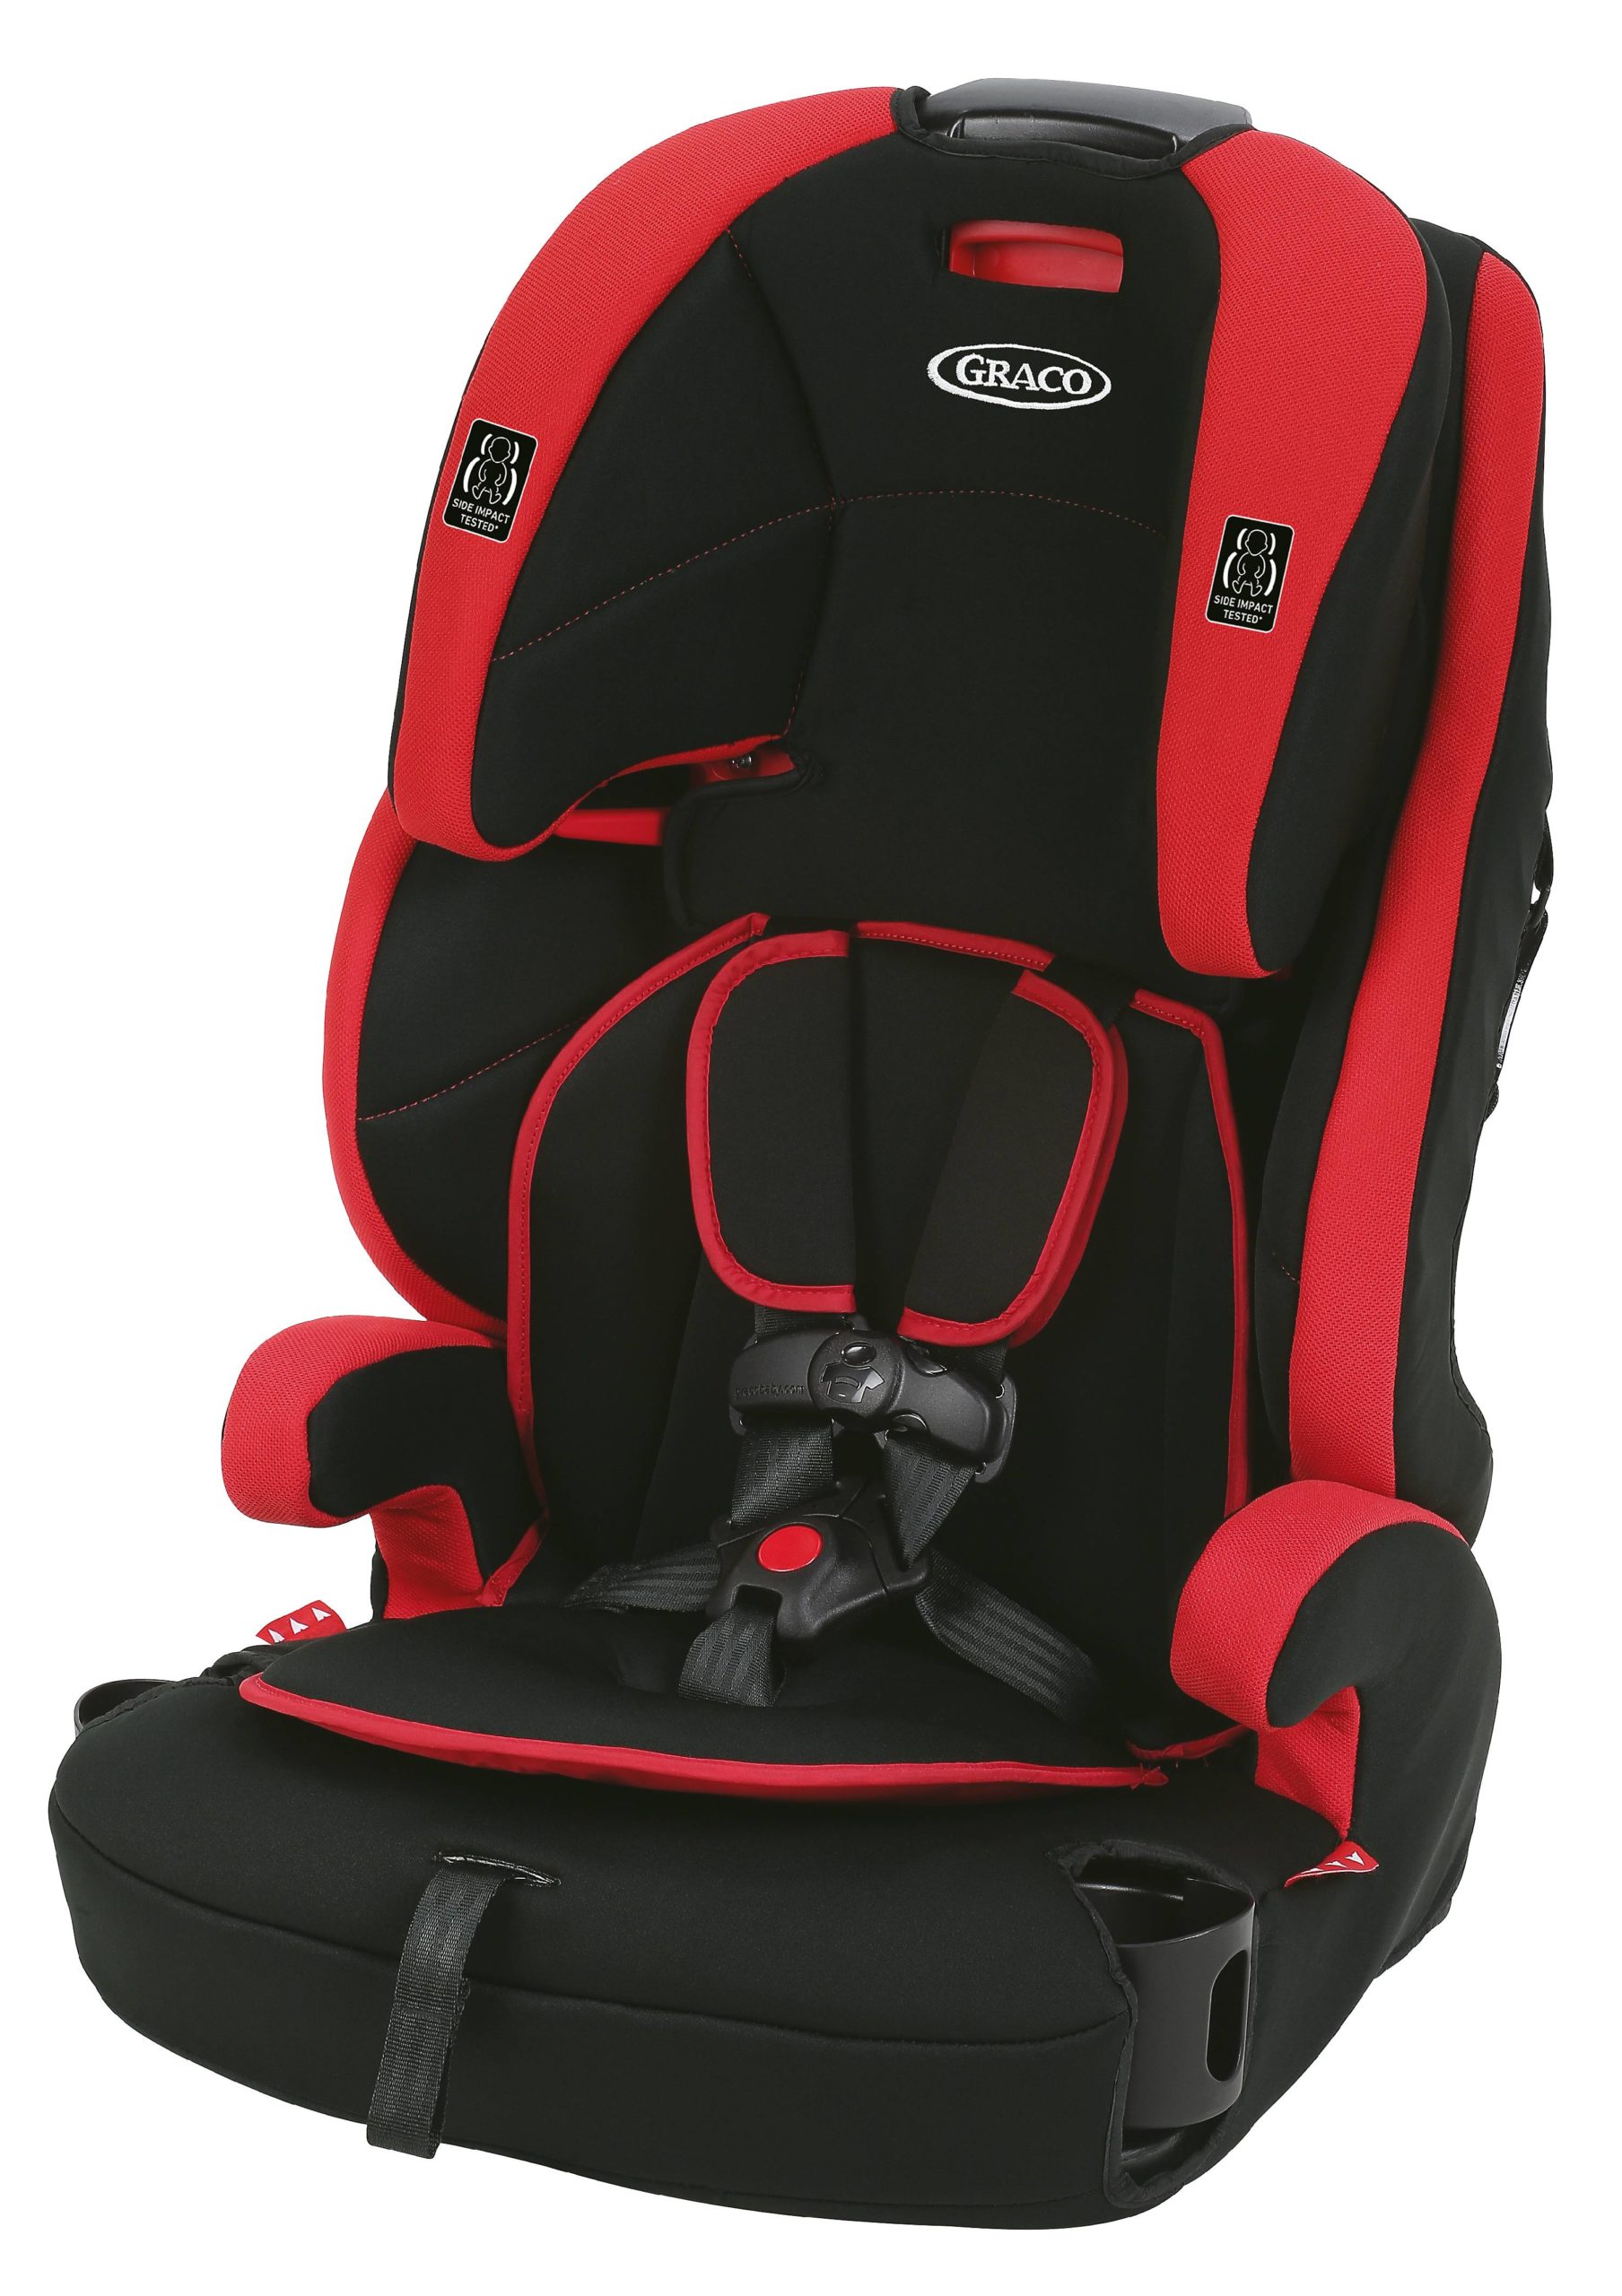 Graco Booster With Harness - Baby Bundles on The Go